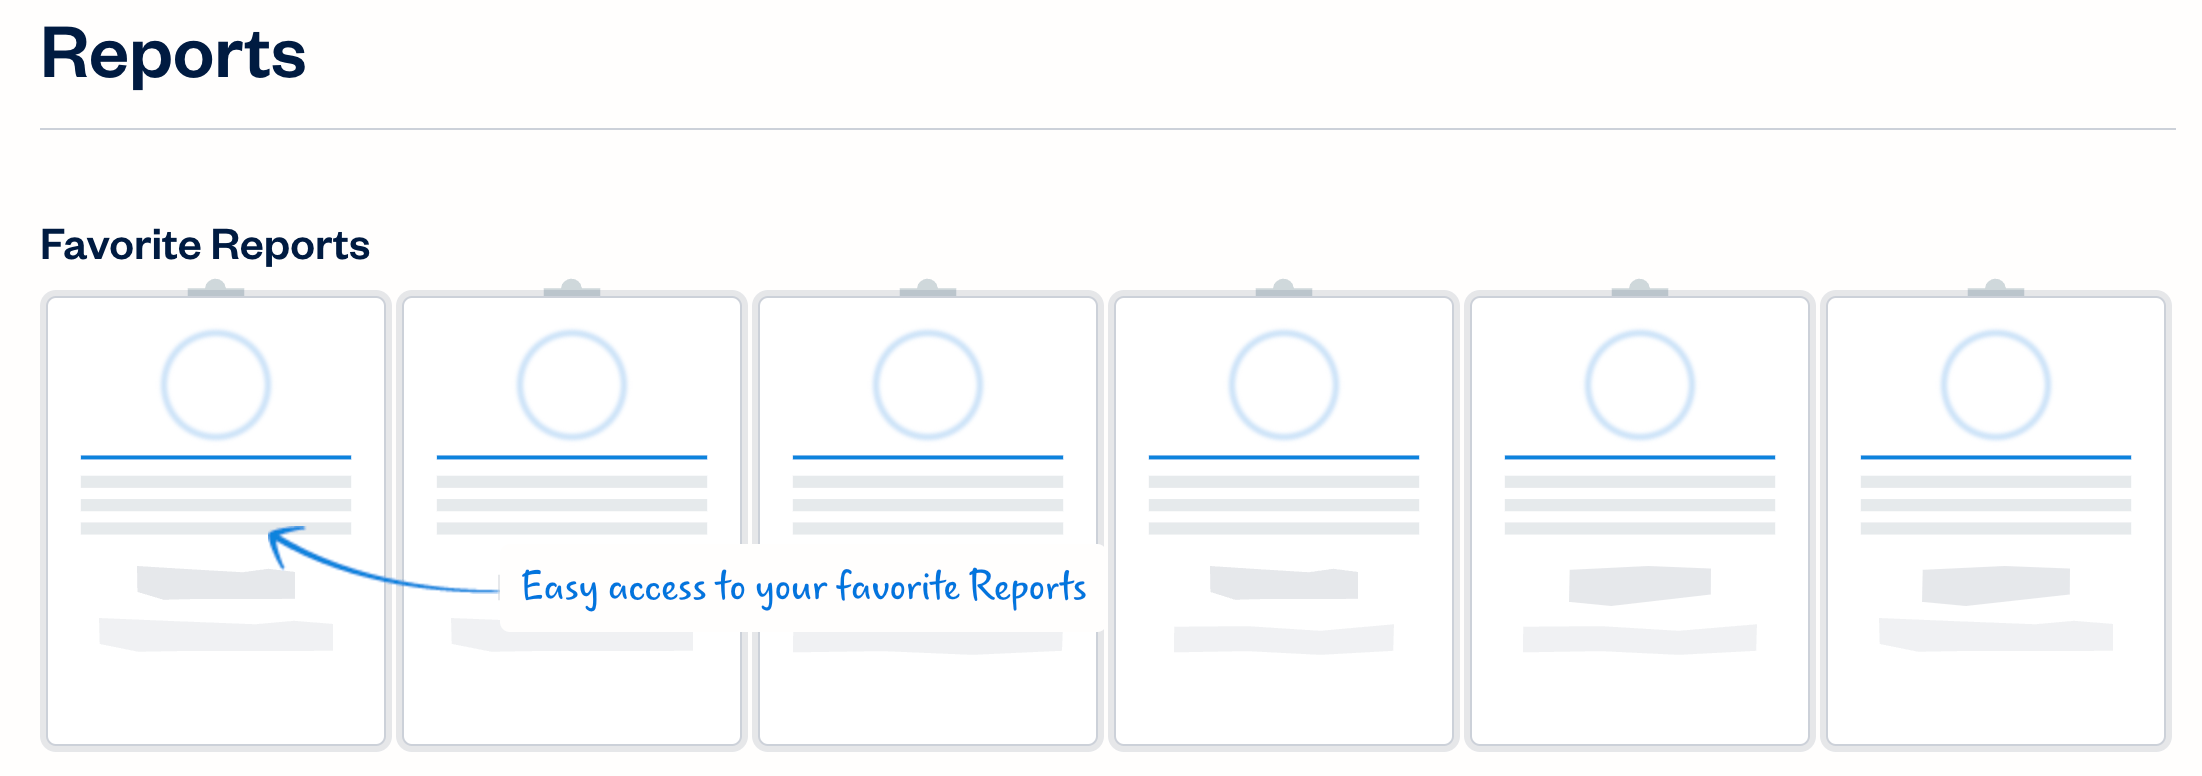 Favorite reports section with 6 empty slots for reports to be added to.